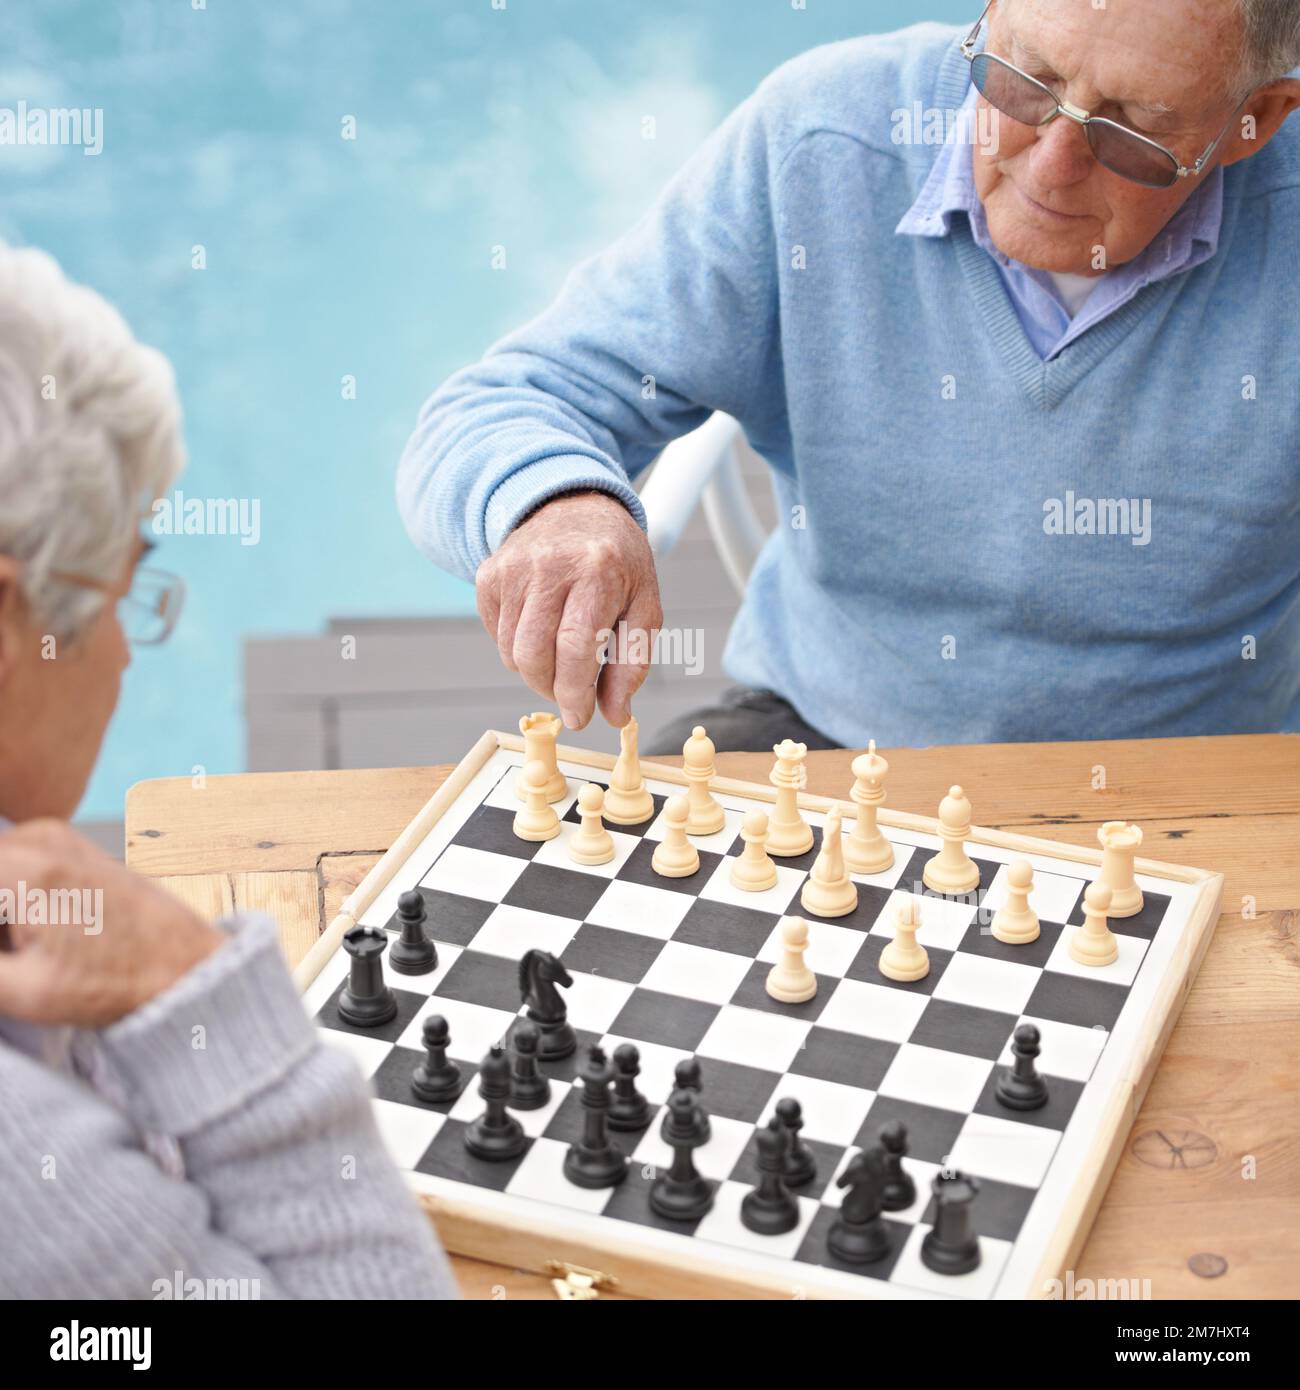 Passing the time with an engrossing game of chess. An elderly couple playing a game of chess. Stock Photo